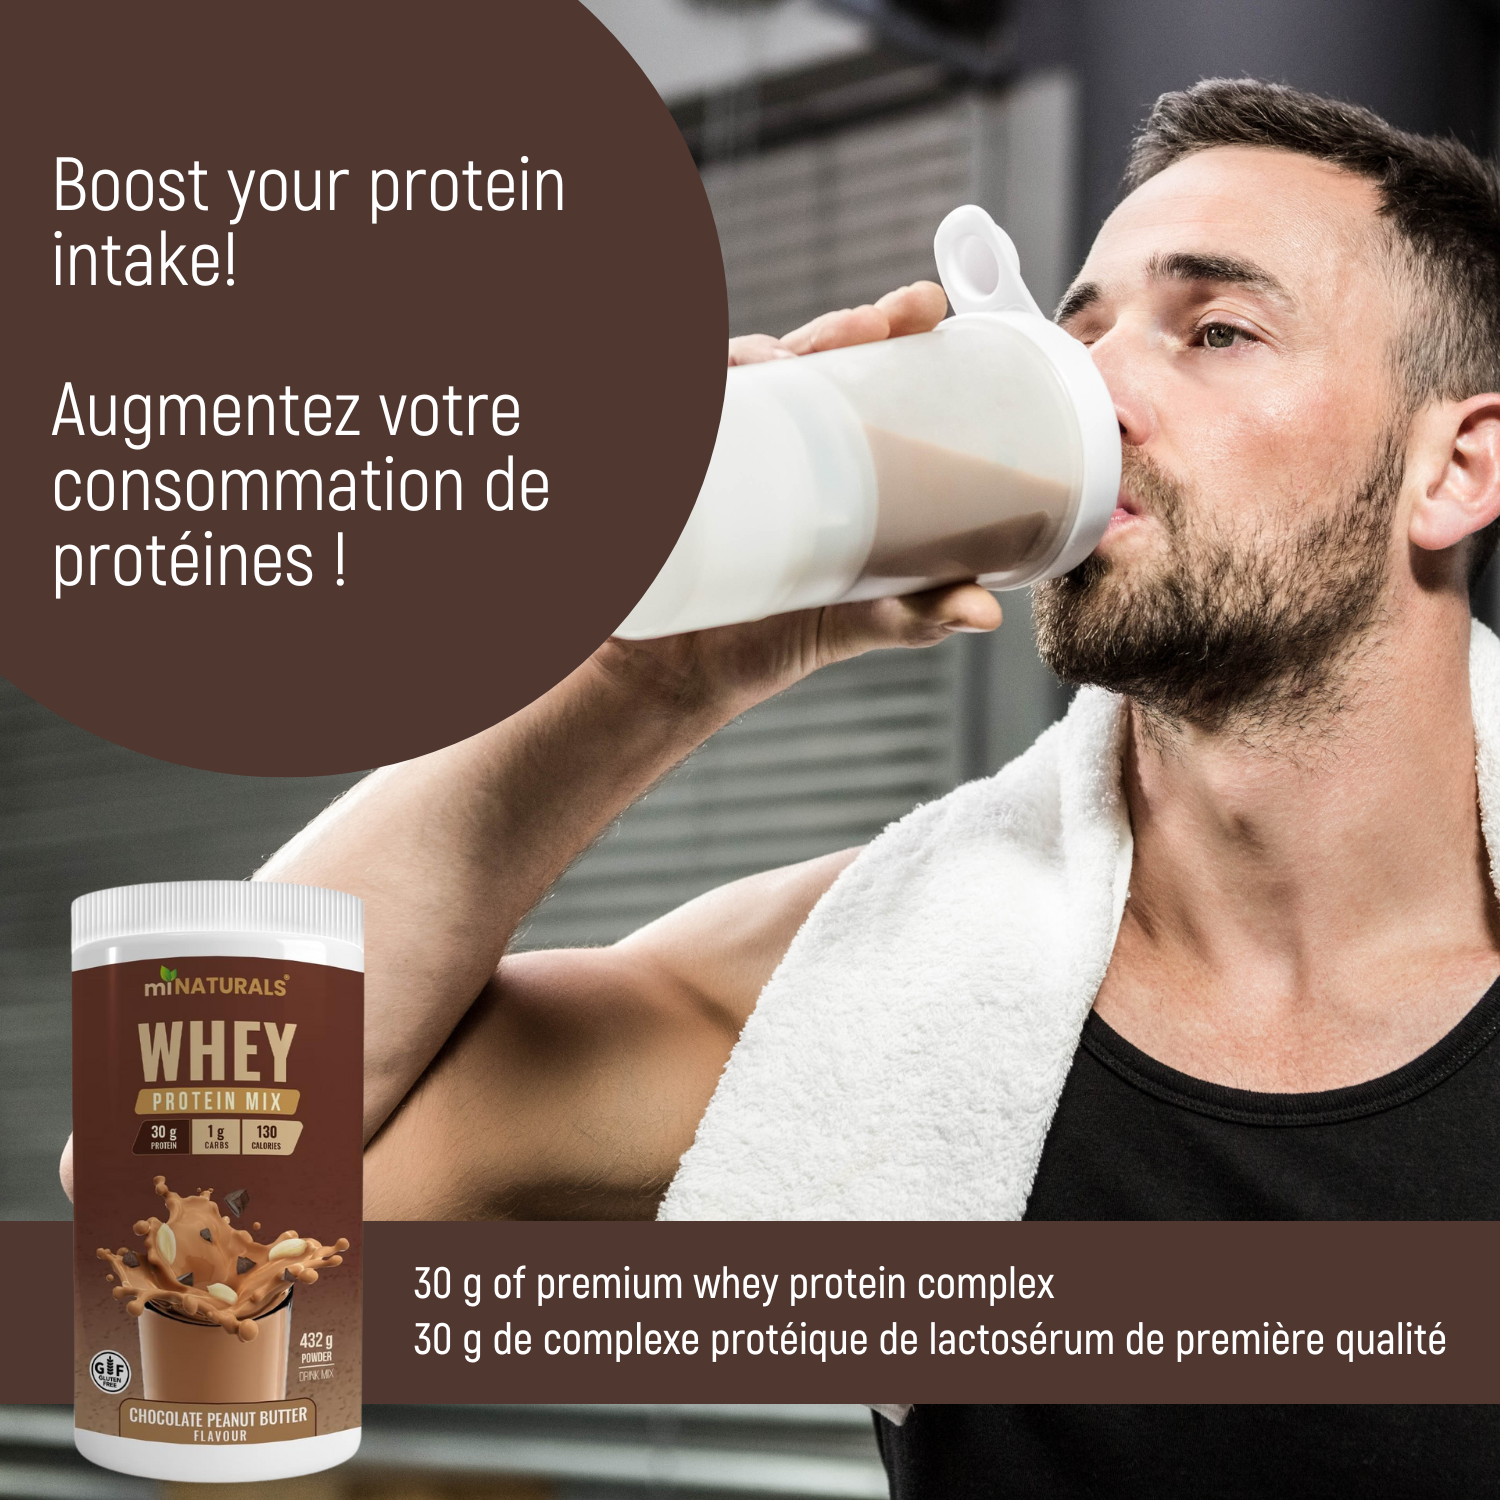 Whey Pure Isolate High Protein Drink Mix Powder - 432 g (Chocolate Peanut Butter)